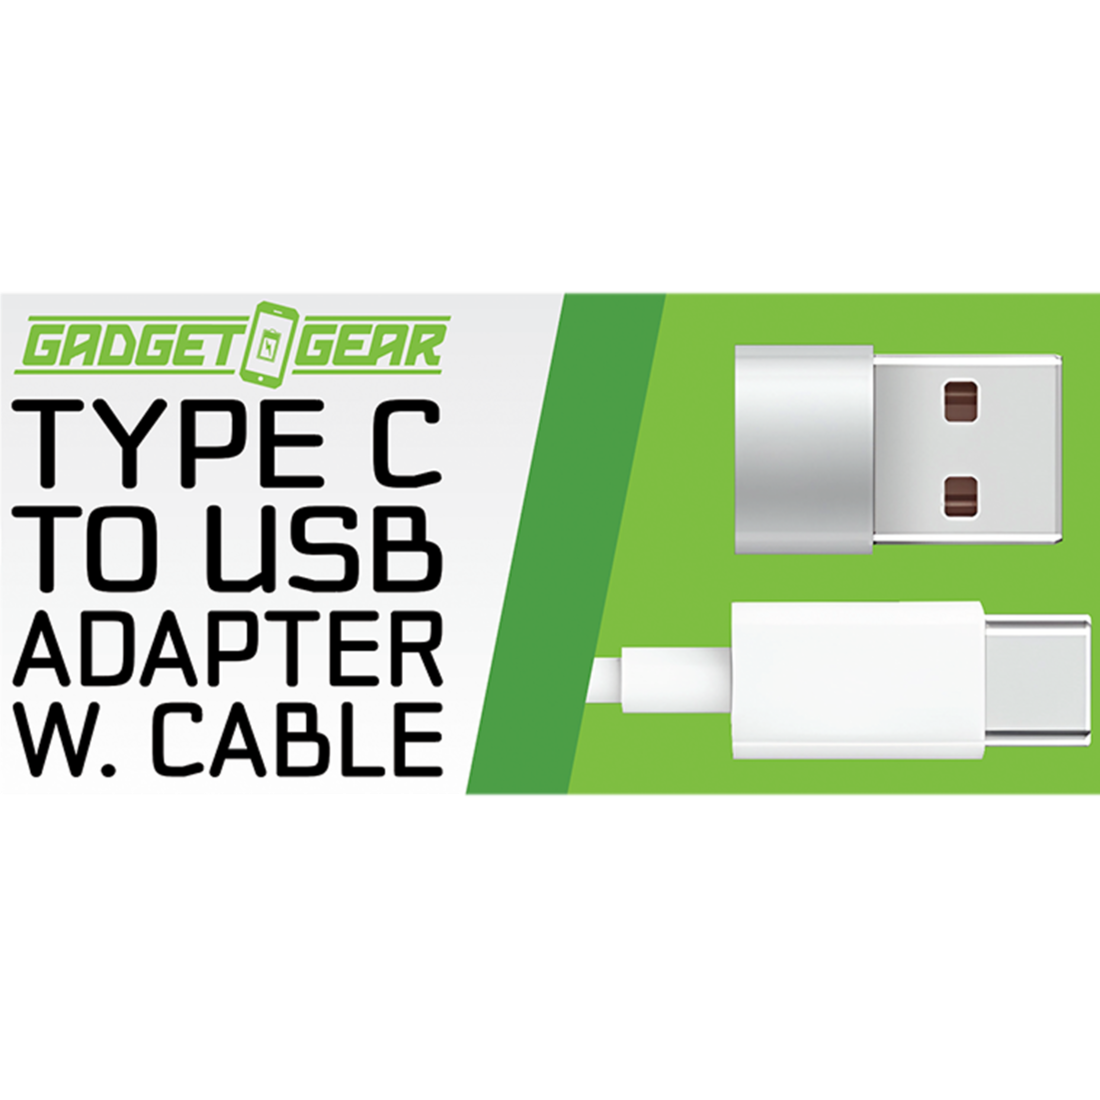 WHOLESALE 3FT USB-C-TO-USB-C CABLE ADAPTER CONVERTER SETS 6 PIECES PER DISPLAY 24835